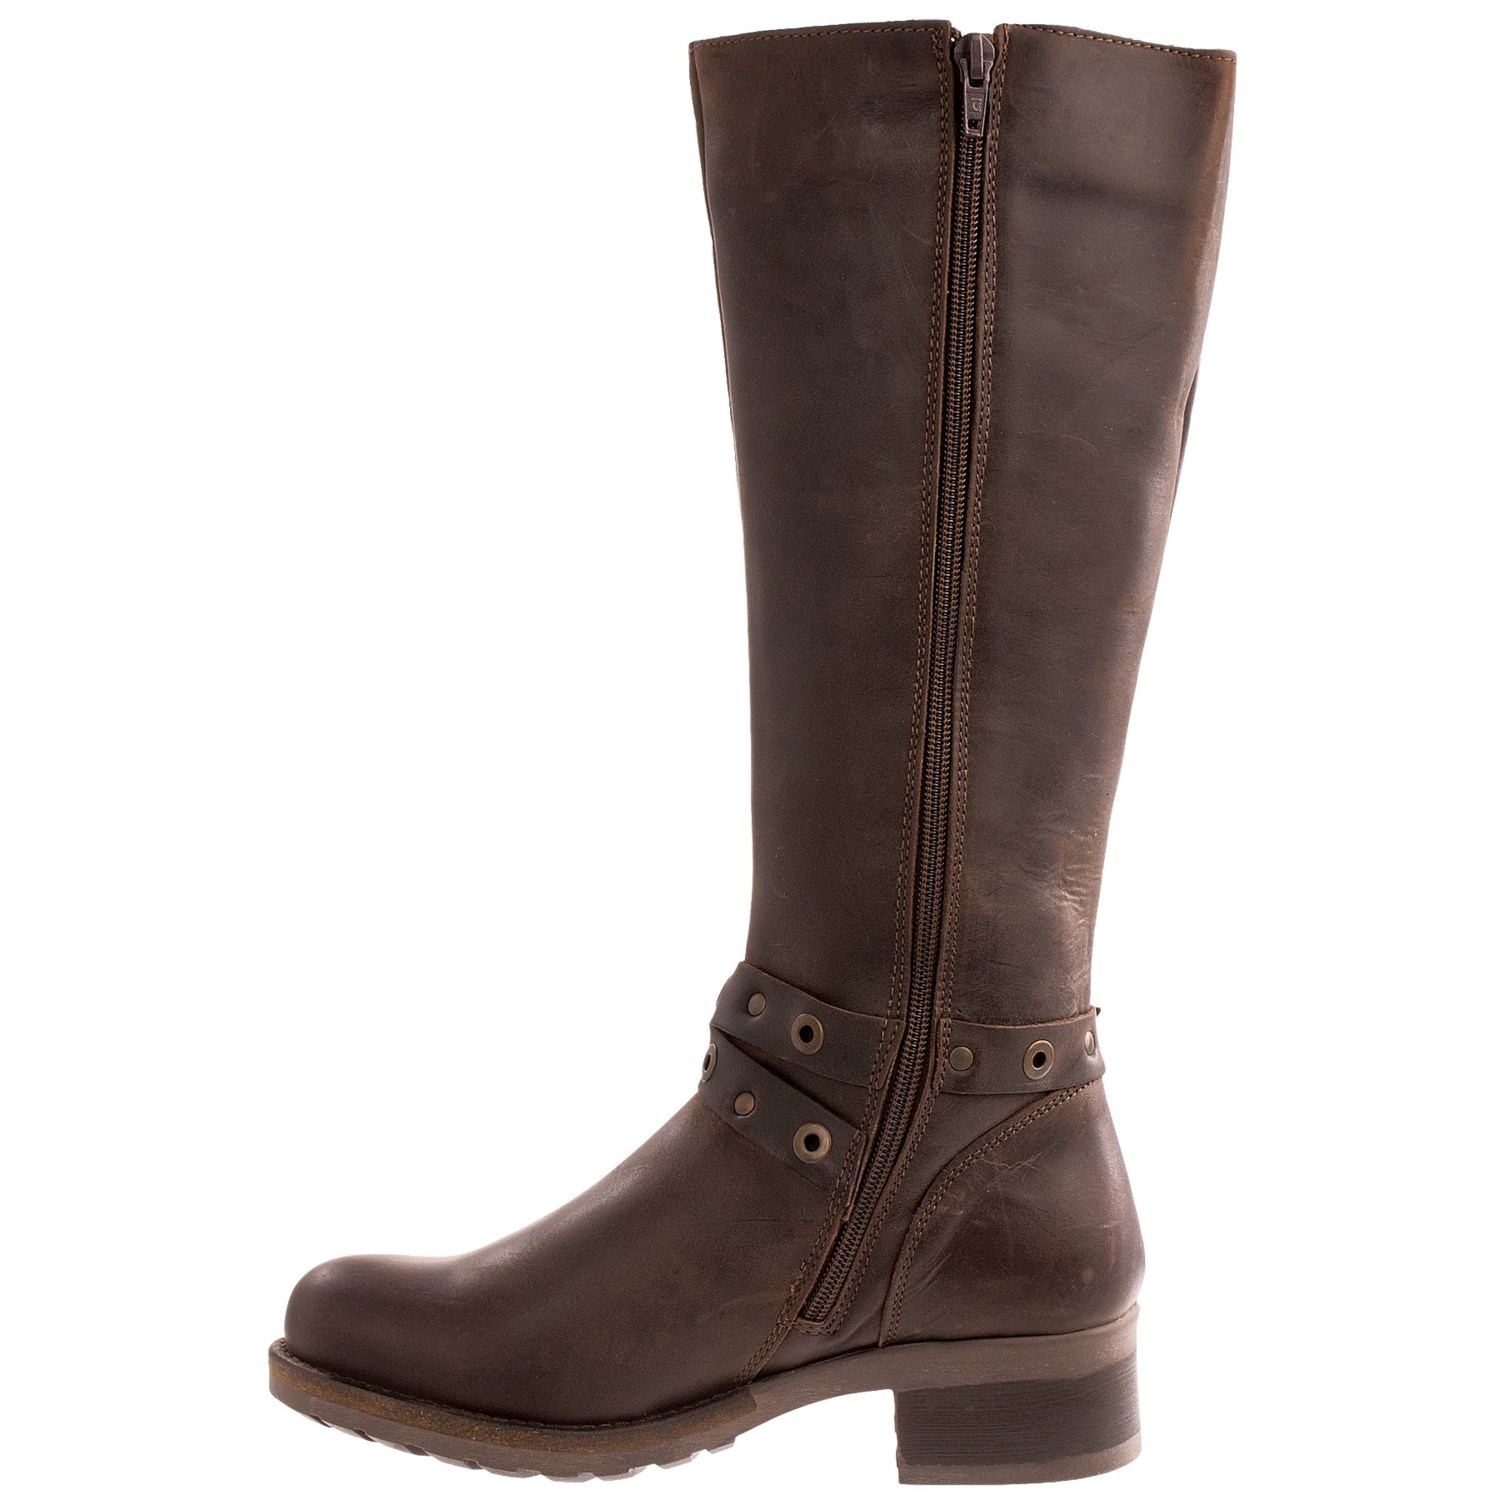 Bos. & Co. Boomer Biker Boots (For Women) 8107T - Save 85%